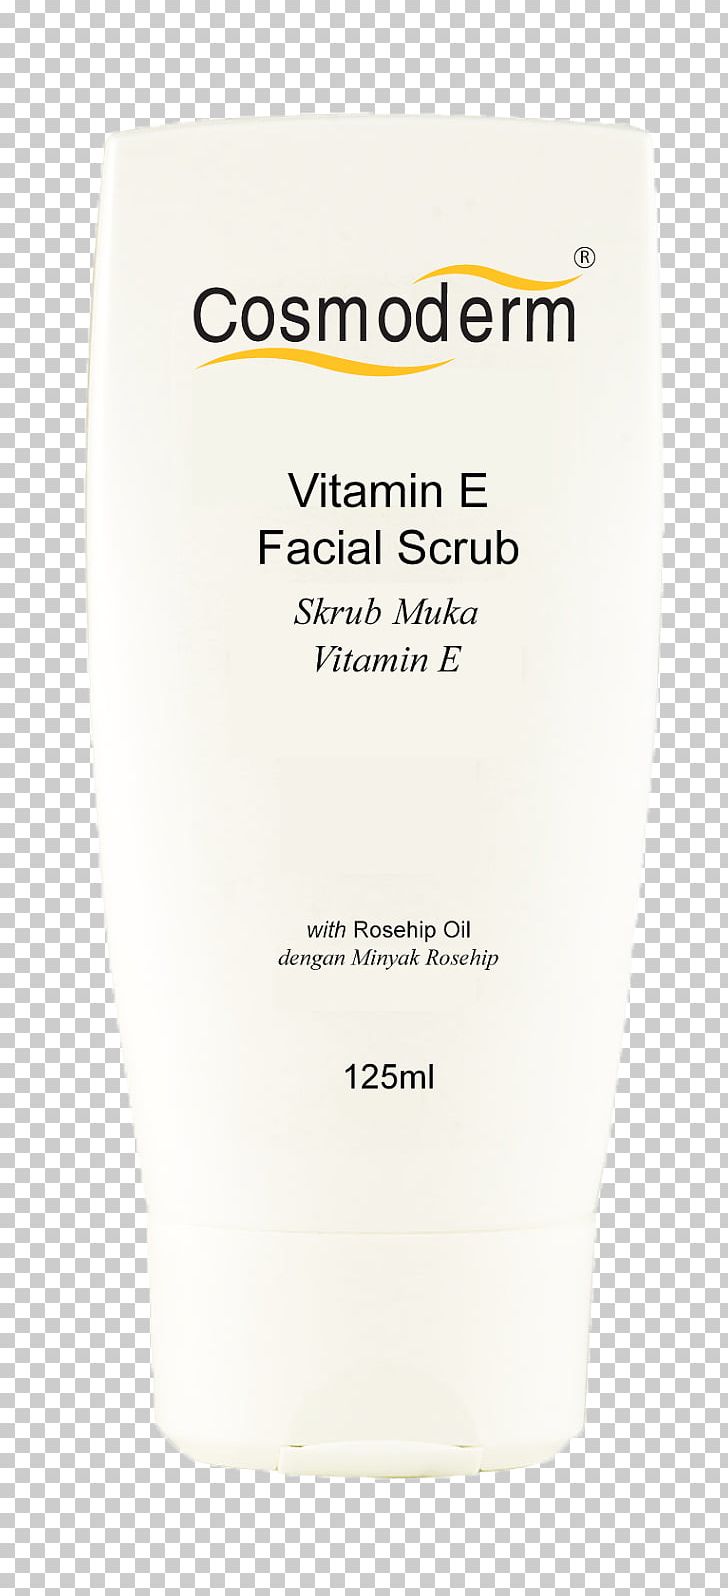 Lotion Cream Vanity Cosmeceutical Sdn Bhd PNG, Clipart, Cream, Face Scrub, Lotion, Skin Care Free PNG Download